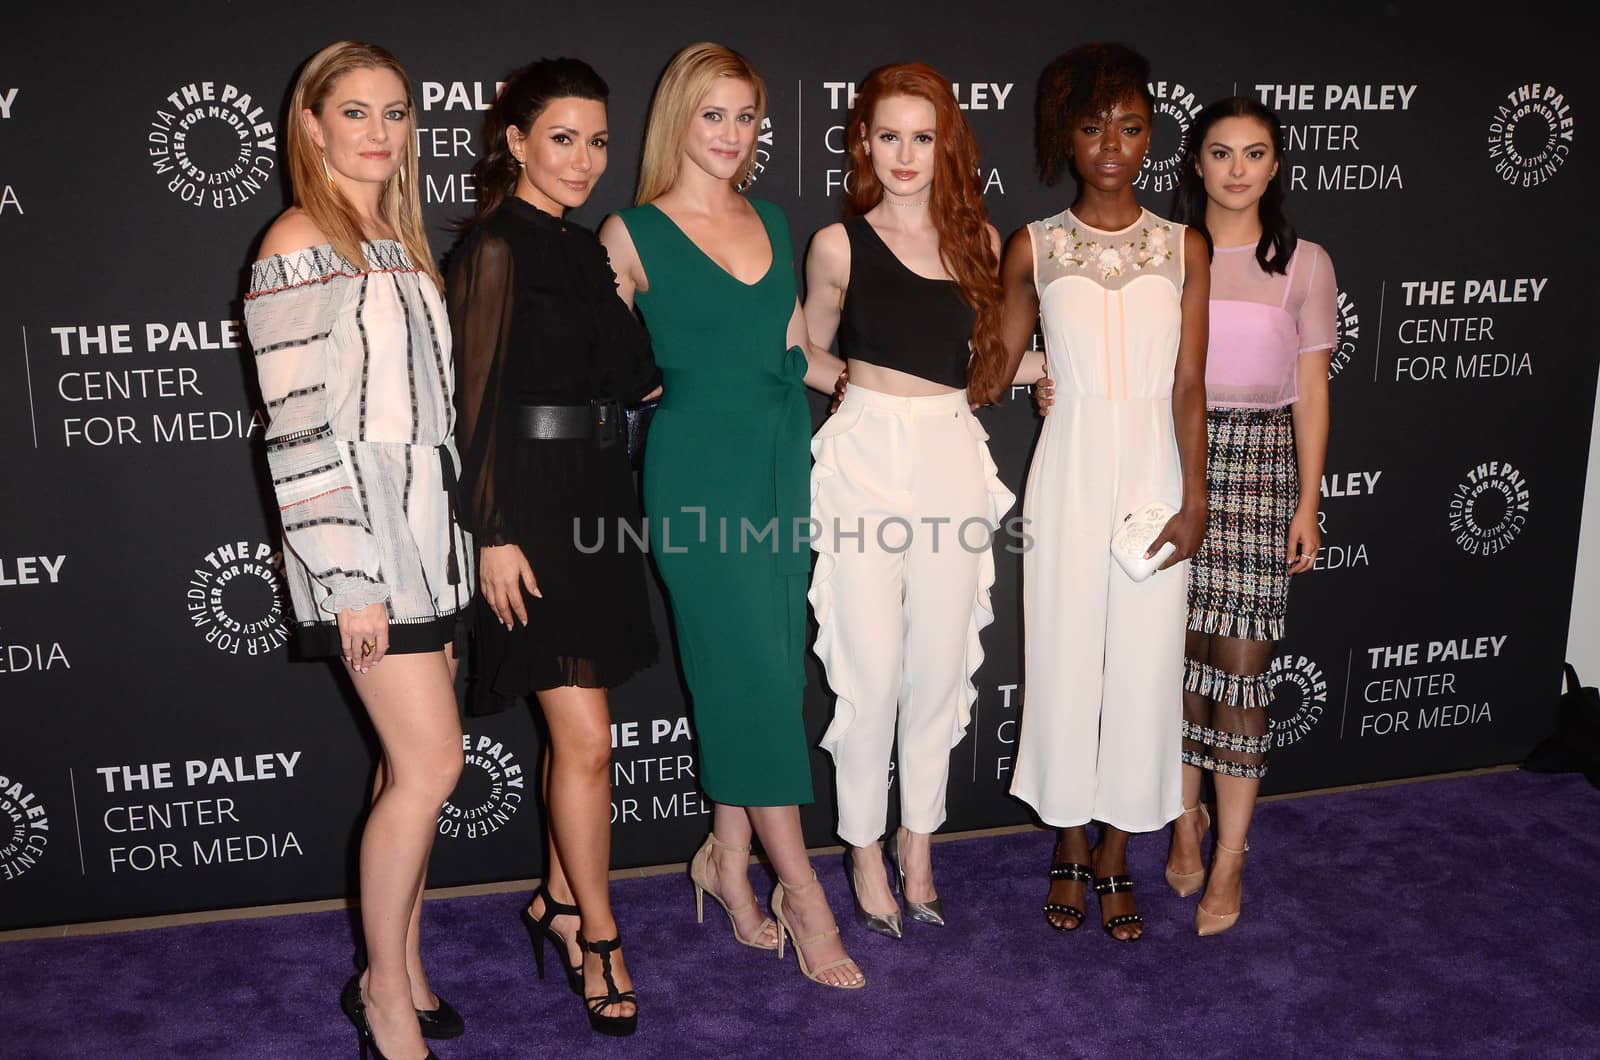 Madchen Amick, Marisol Nichols, Lili Reinhart, Madelaine Petsch, Ashleigh Murray, Camila Mendes at "Riverdale" Screening and Conversation presentted by the Paley Center for Media, Beverly Hills, CA 04-27-17/ImageCollect by ImageCollect